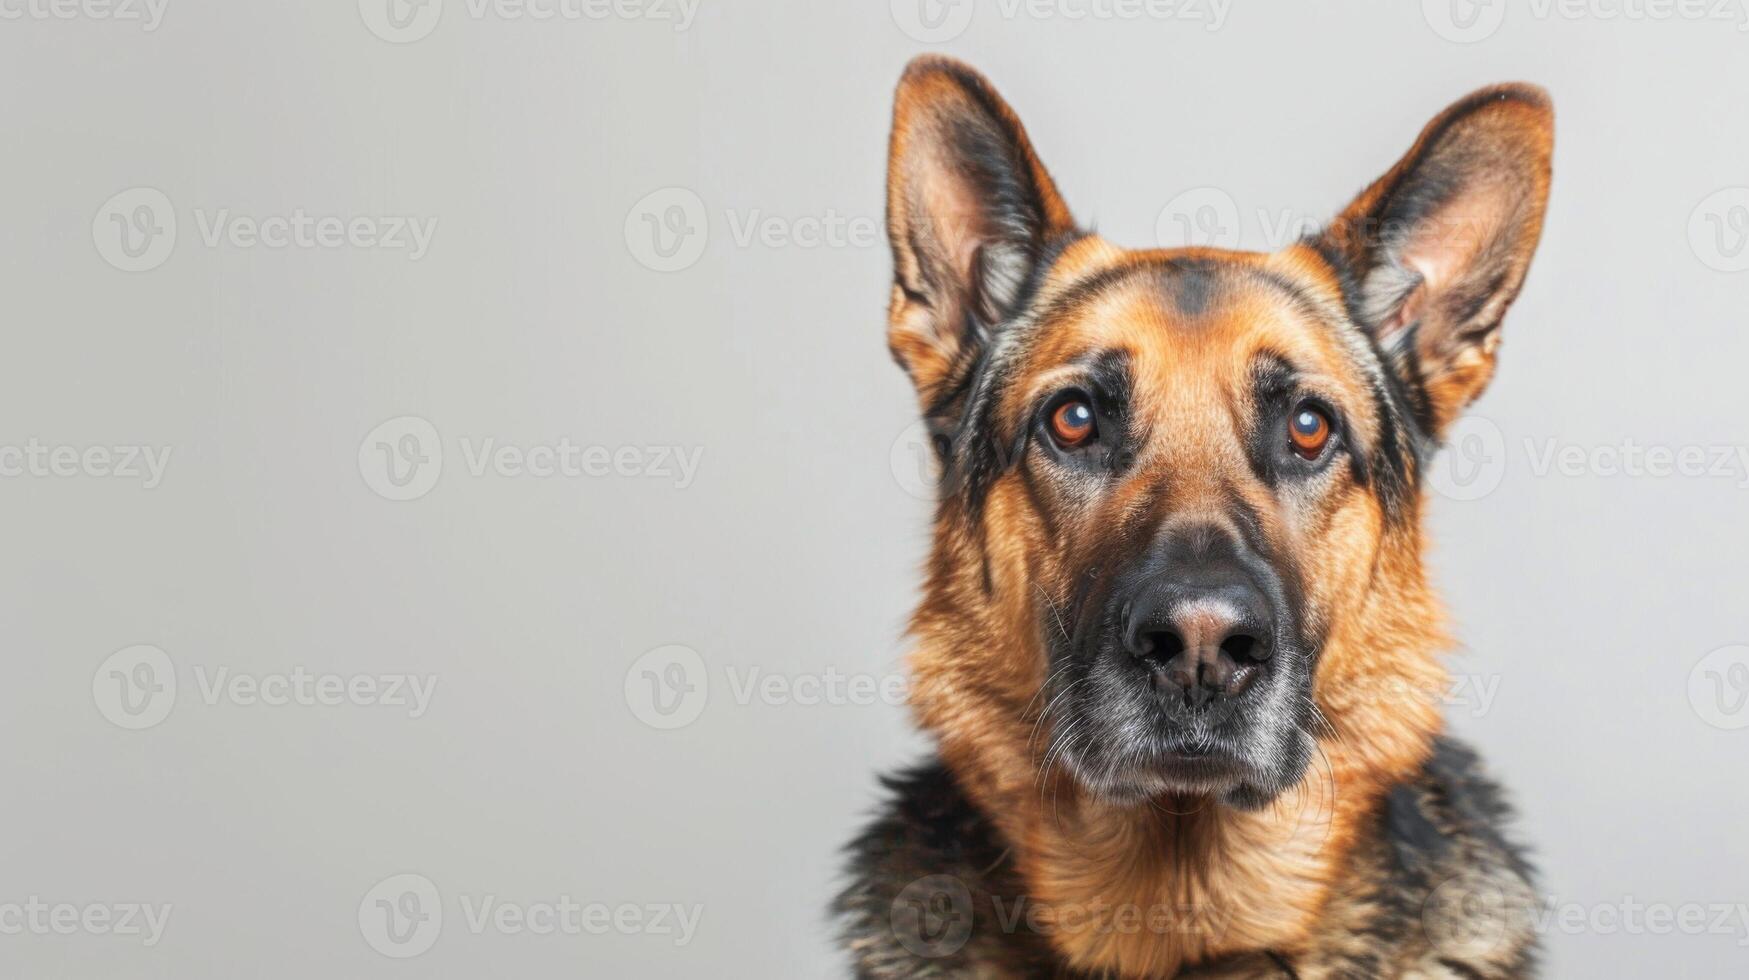 German Shepherd dog portrait featuring an animal that is loyal and intelligent with alert ears photo